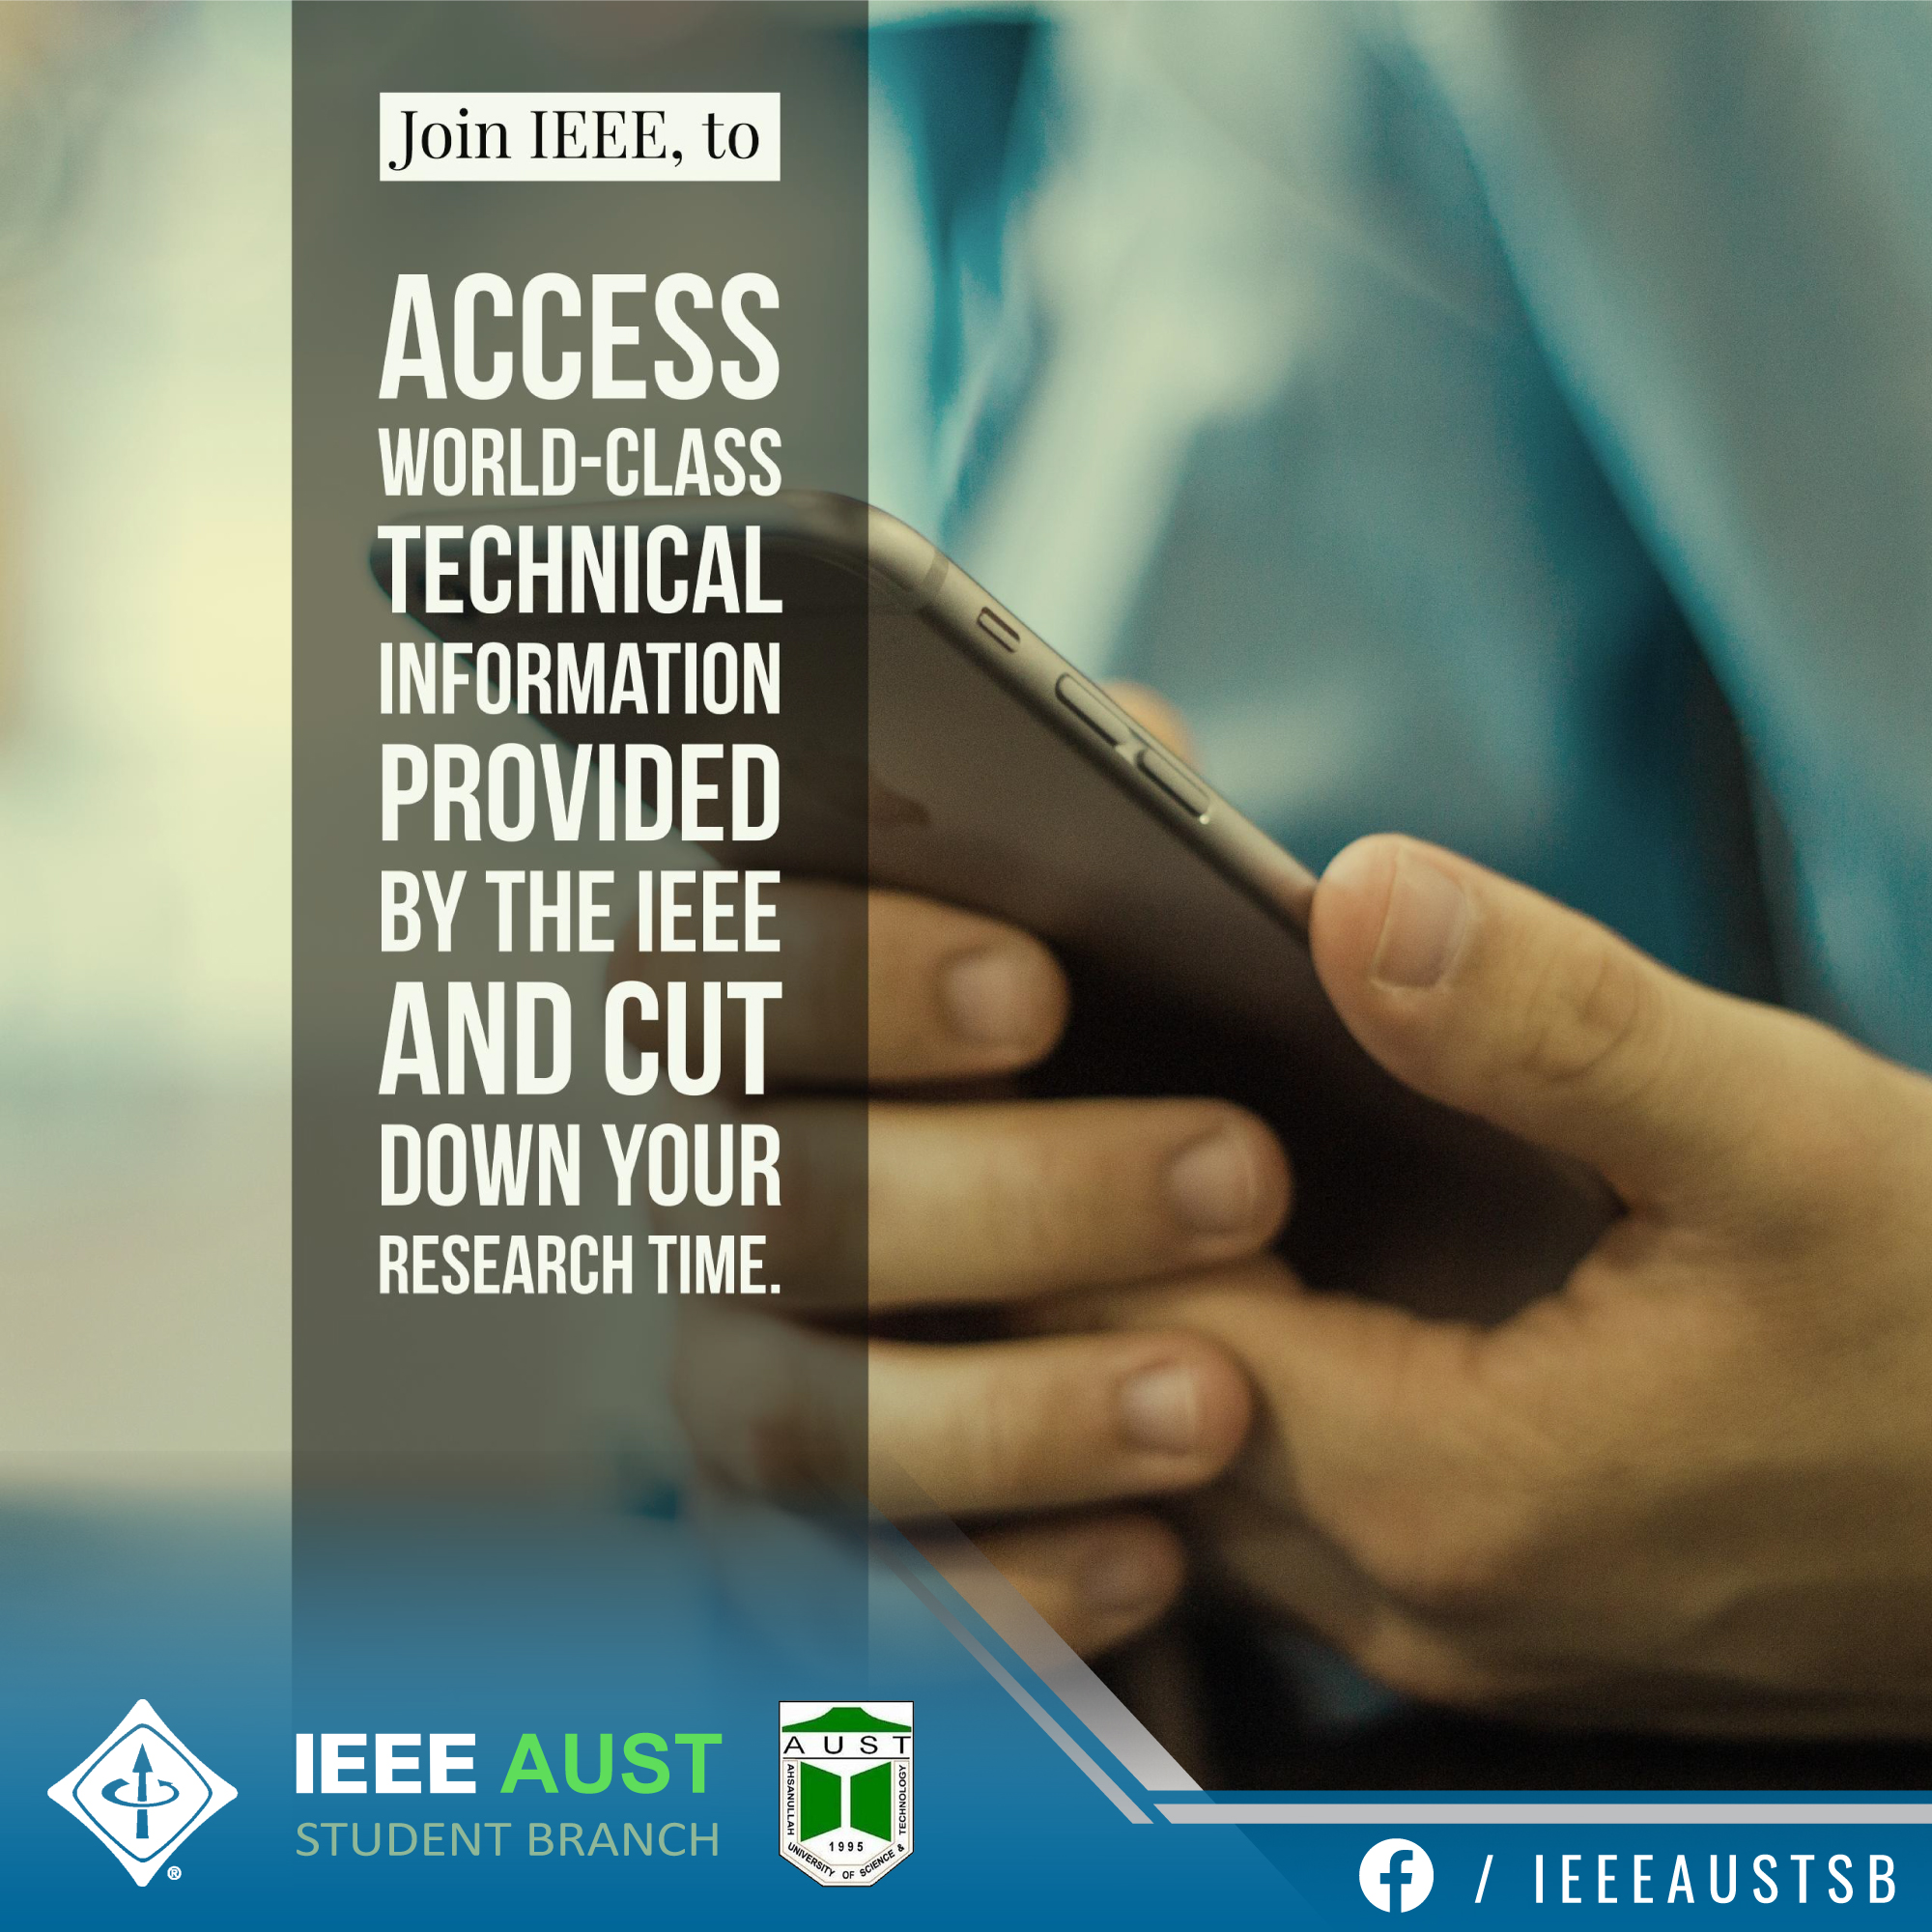 Join IEEE to access world-class technical information provided by the IEEE and cut down your research time.